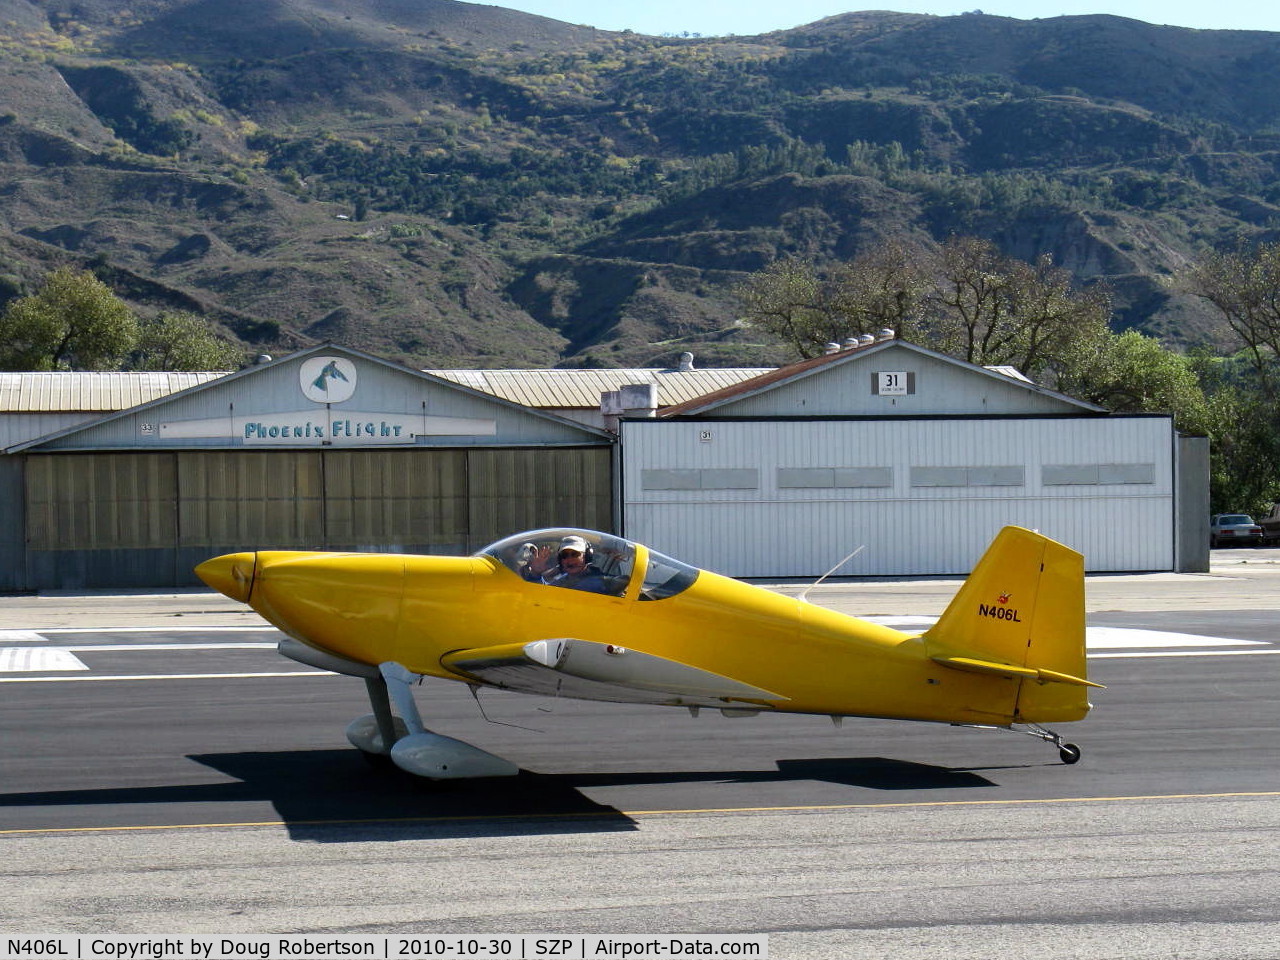 N406L, 2008 Vans RV-6 C/N 936, Provo PROVO 6, Lycoming O-320 160 Hp, beautiful airplane and a great ride, taxi back